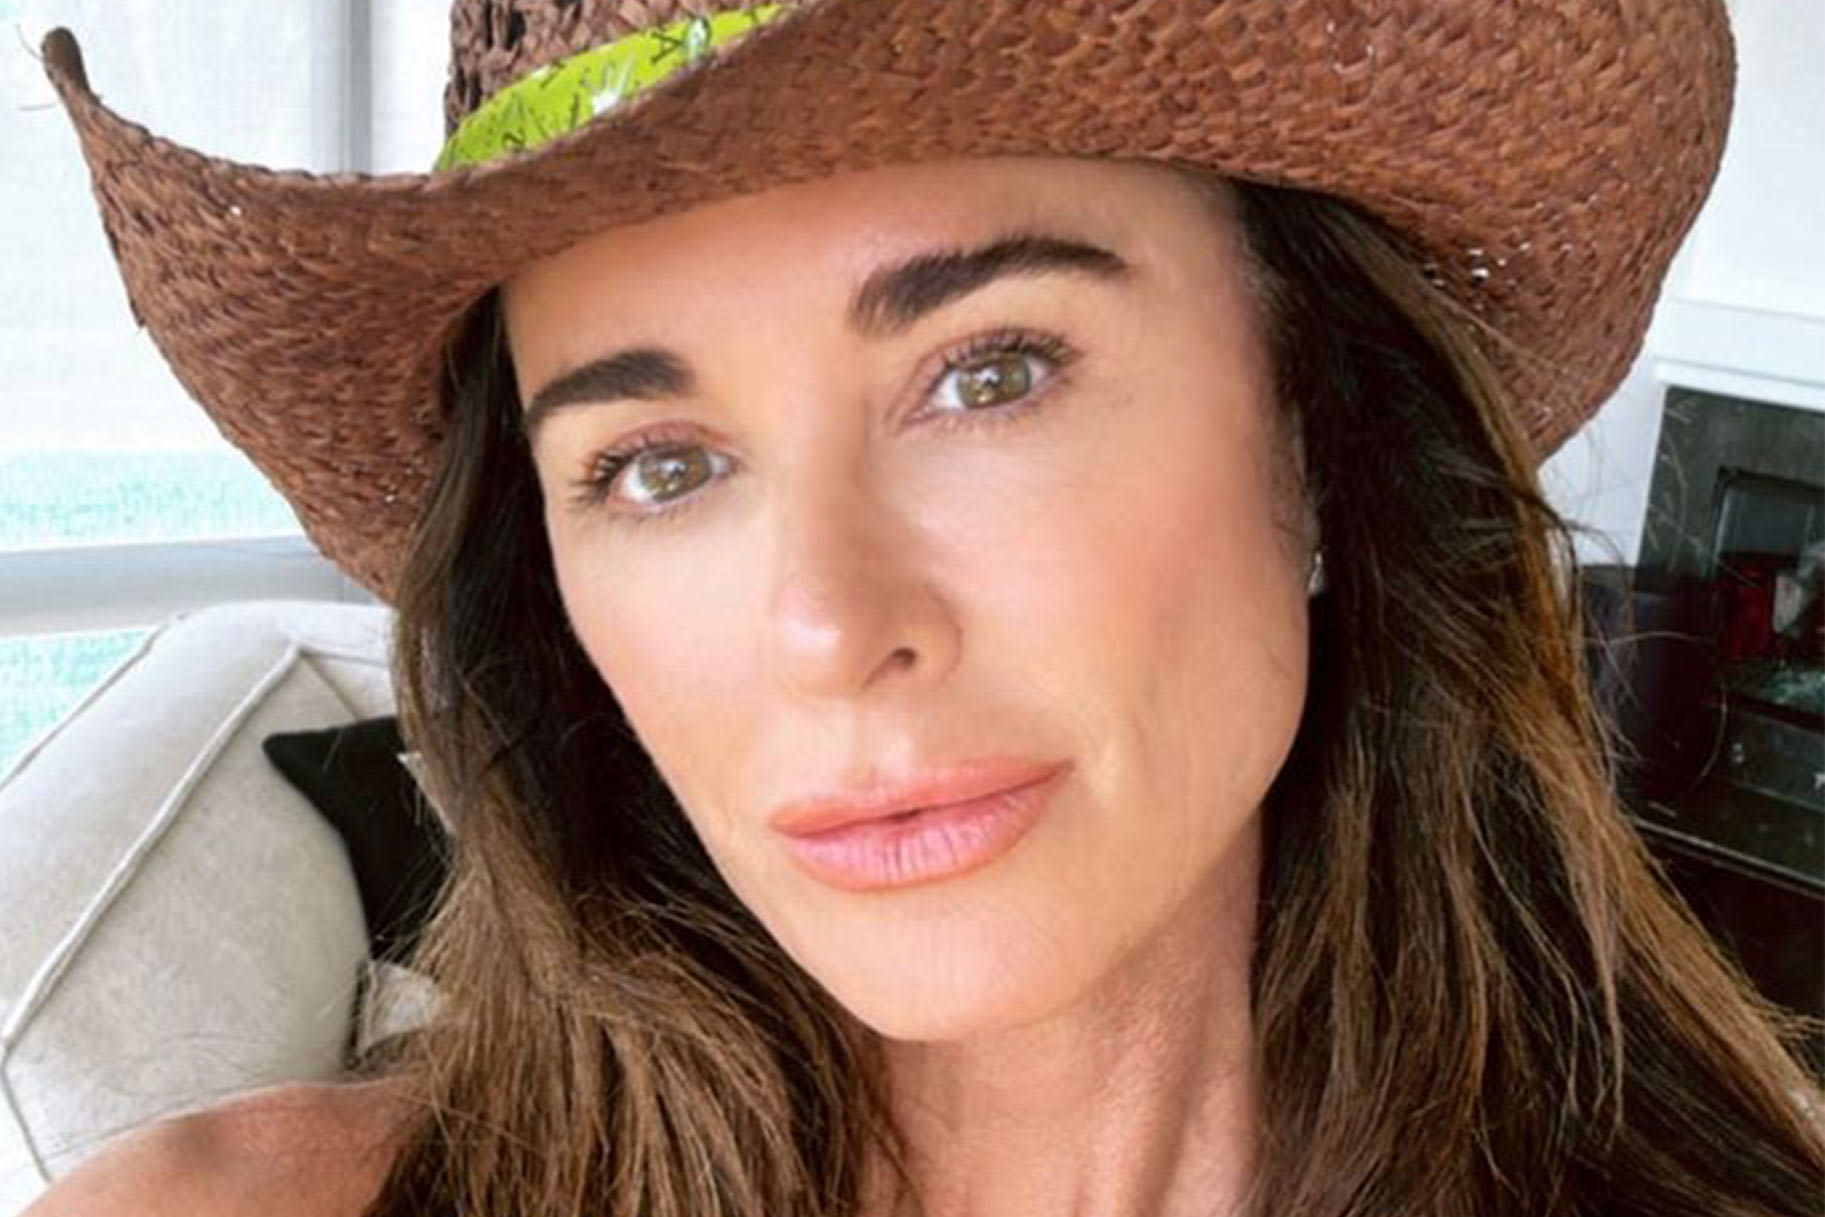 Kyle Richards Takes You Inside What a "Good Morning" Looks Like at Her House (PICS)